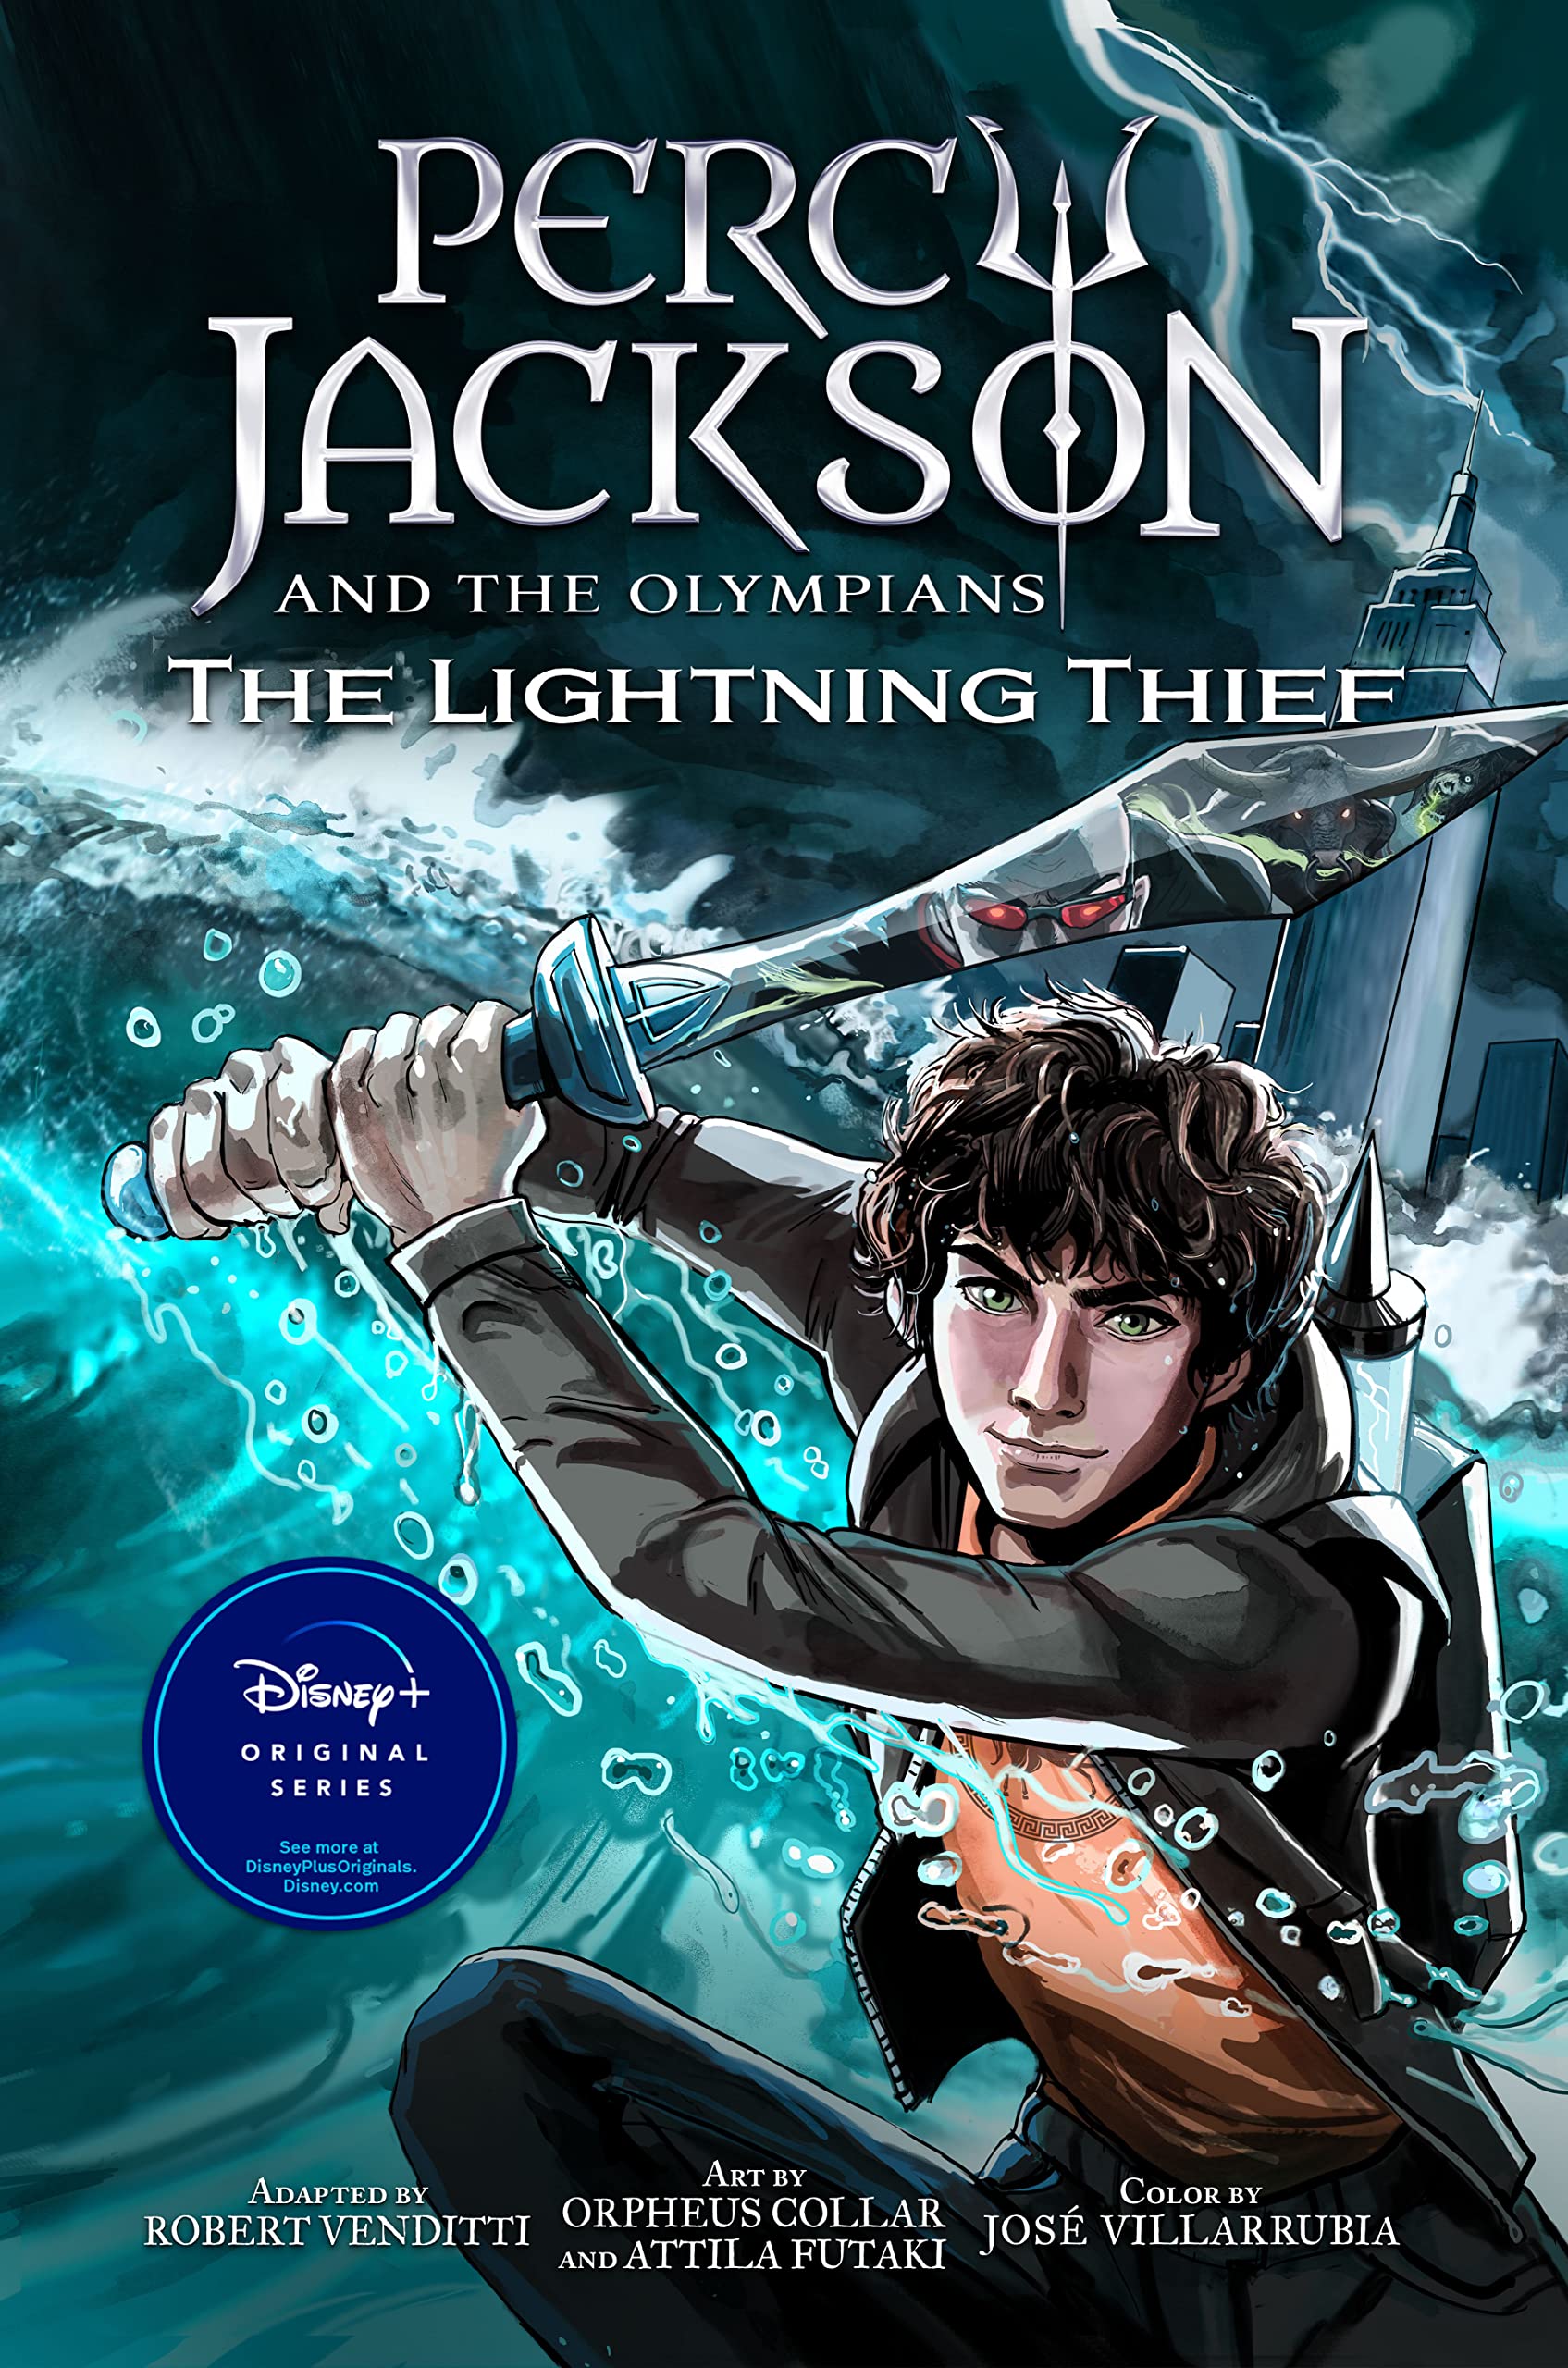 Percy Jackson and the Olympians The Lightning Thief The Graphic Novel (paperback) (Percy Jackson & the Olympians, 1)